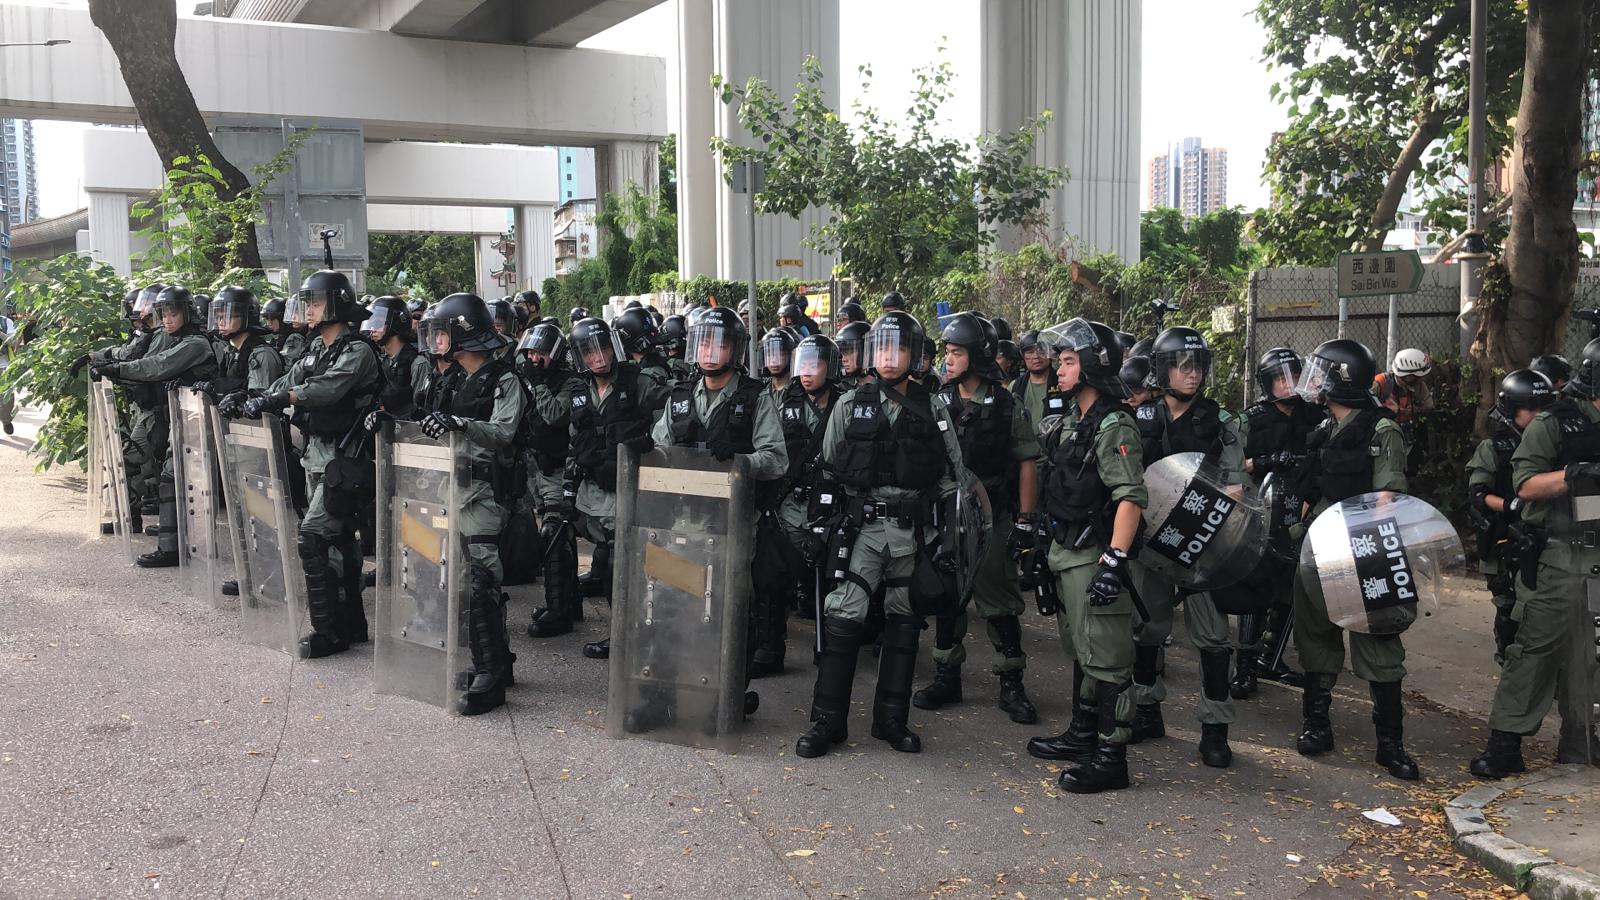 Police gather at Yuen Long after thousands protest against violence used against peaceful protesters.